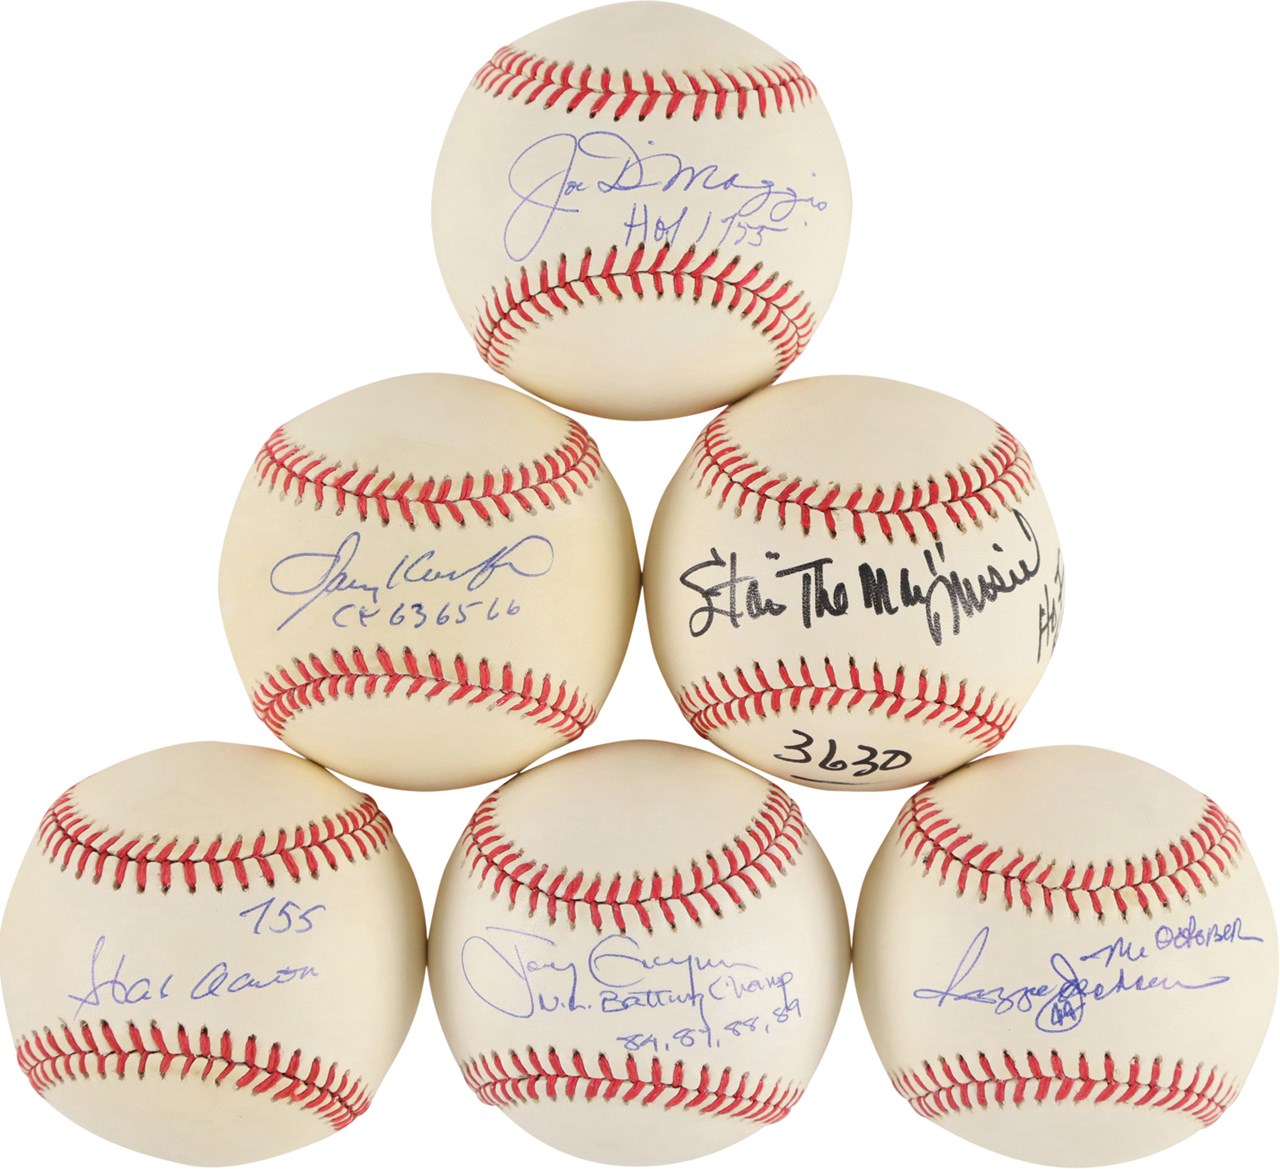 Baseball Autographs - Hall of Fame "Special Inscription" Single Signed Baseball Collection (15) w/Aaron, DiMaggio, and Koufax